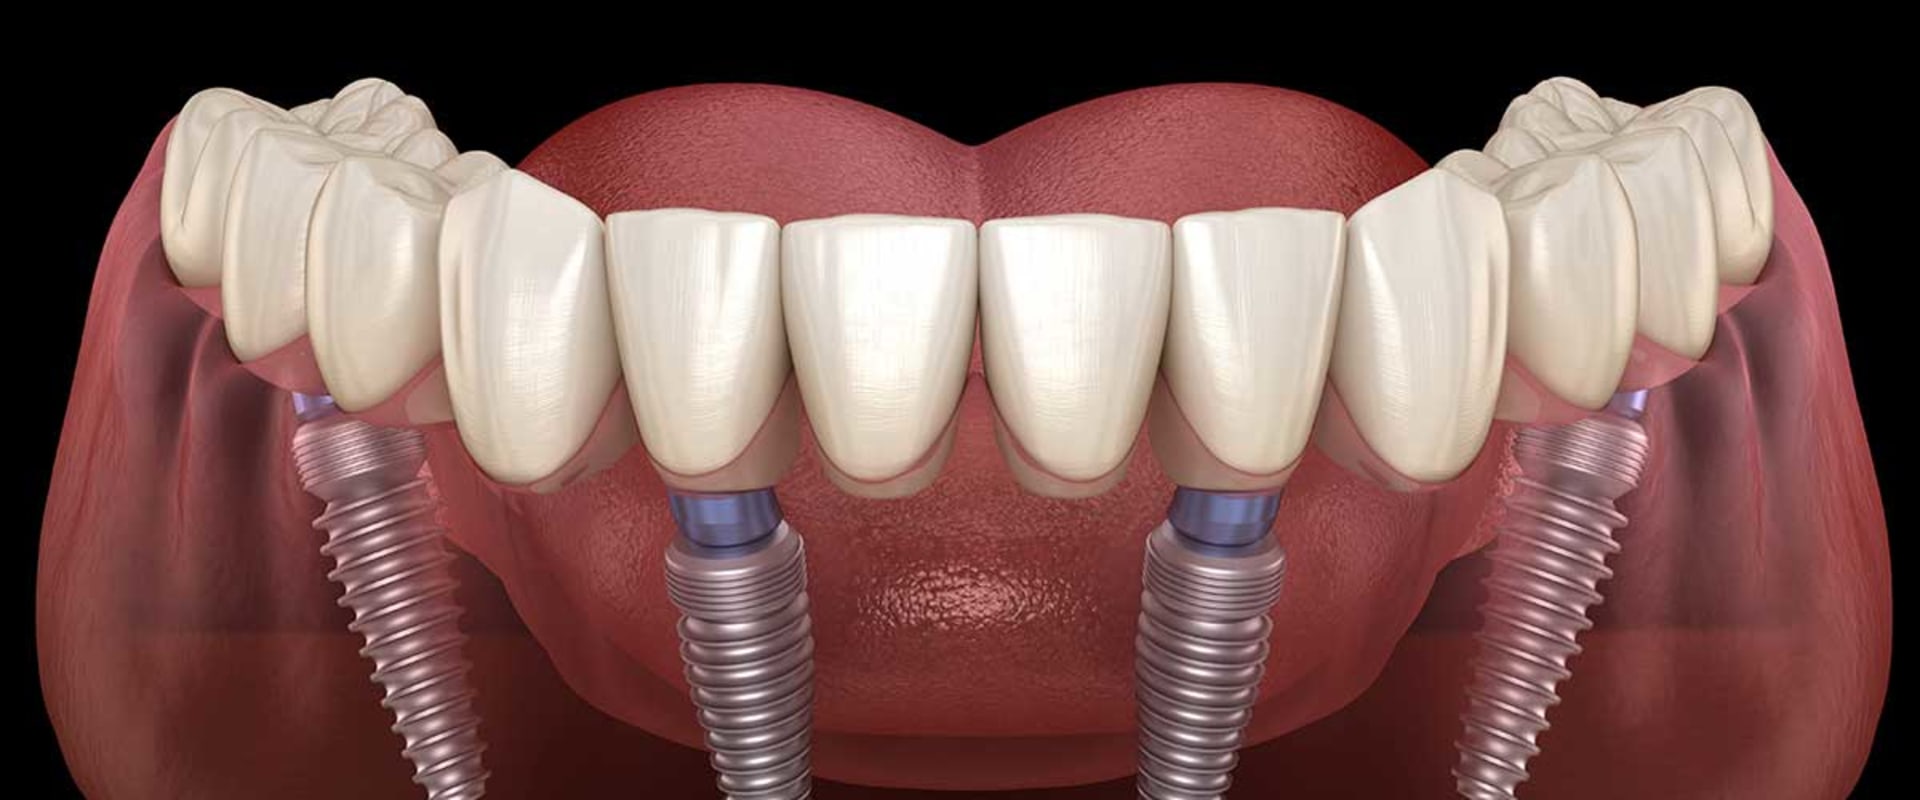 Can Heart Patients Get All-on-4 Dental Implants?